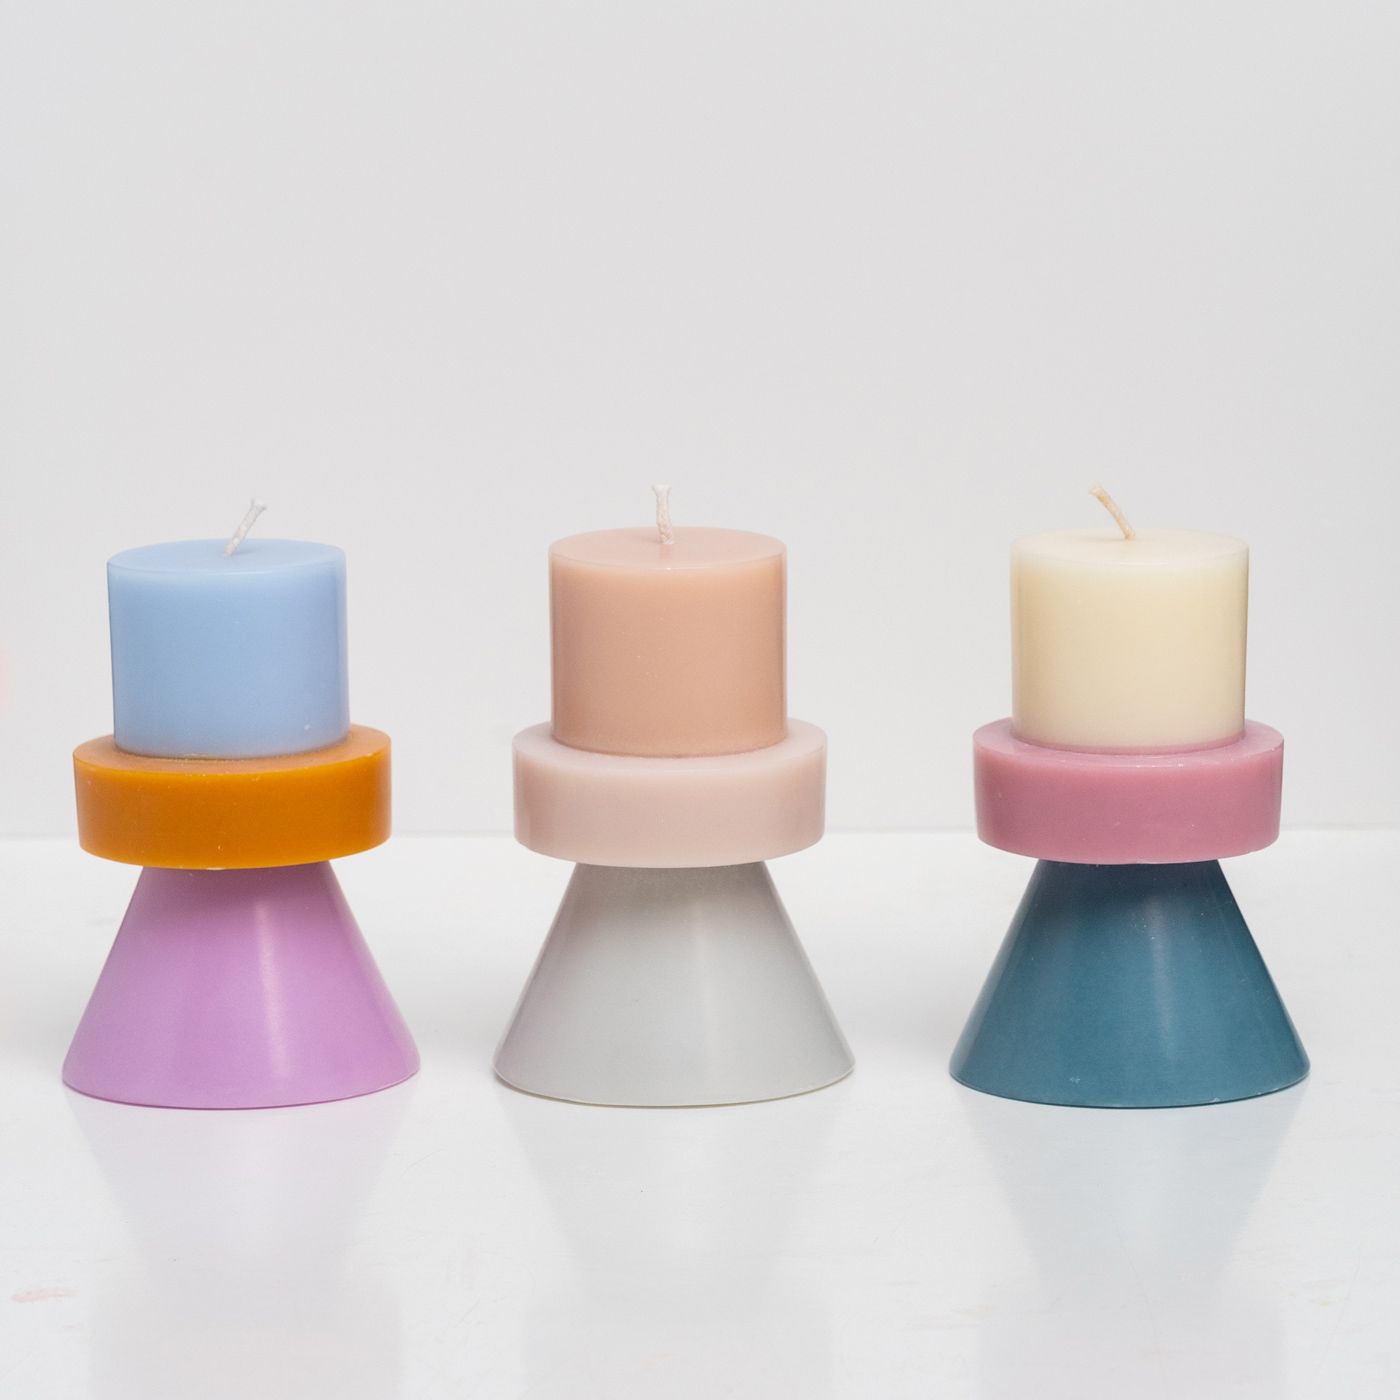 Stack Candle mini by Yod and co in white, purple and blue